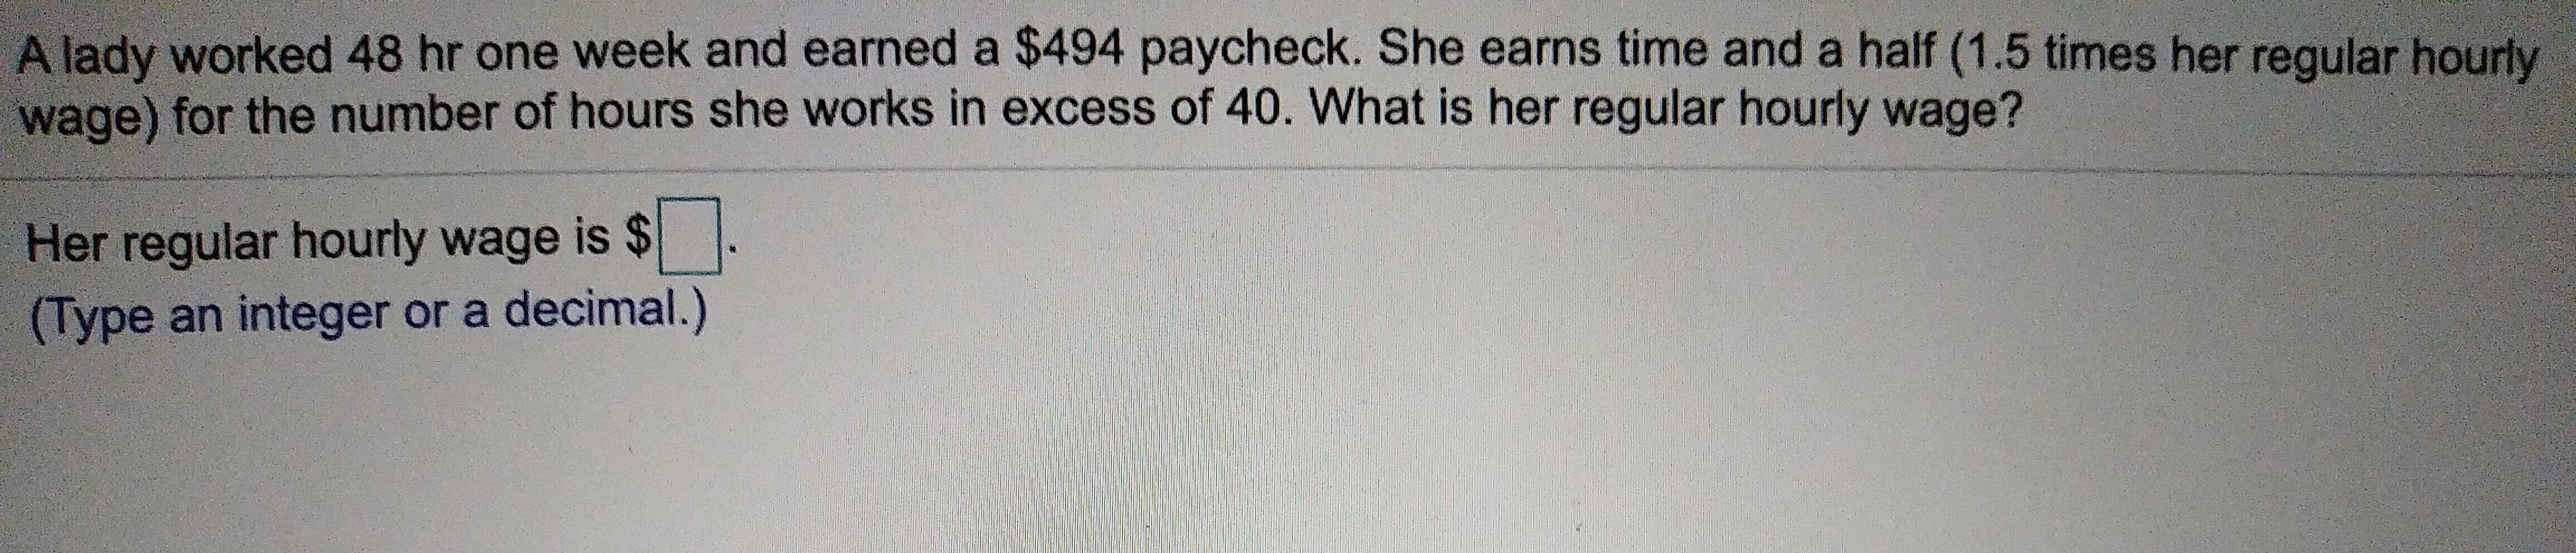 A lady worked 48 hr one week and earned a $494 paycheck. She earns time and a half (1.5 times her reqular hourly
wage) for the number of hours she works in excess of 40. What is her regular hourly wage?
Her regular hourly wage is $
(Type an integer or a decimal.)
